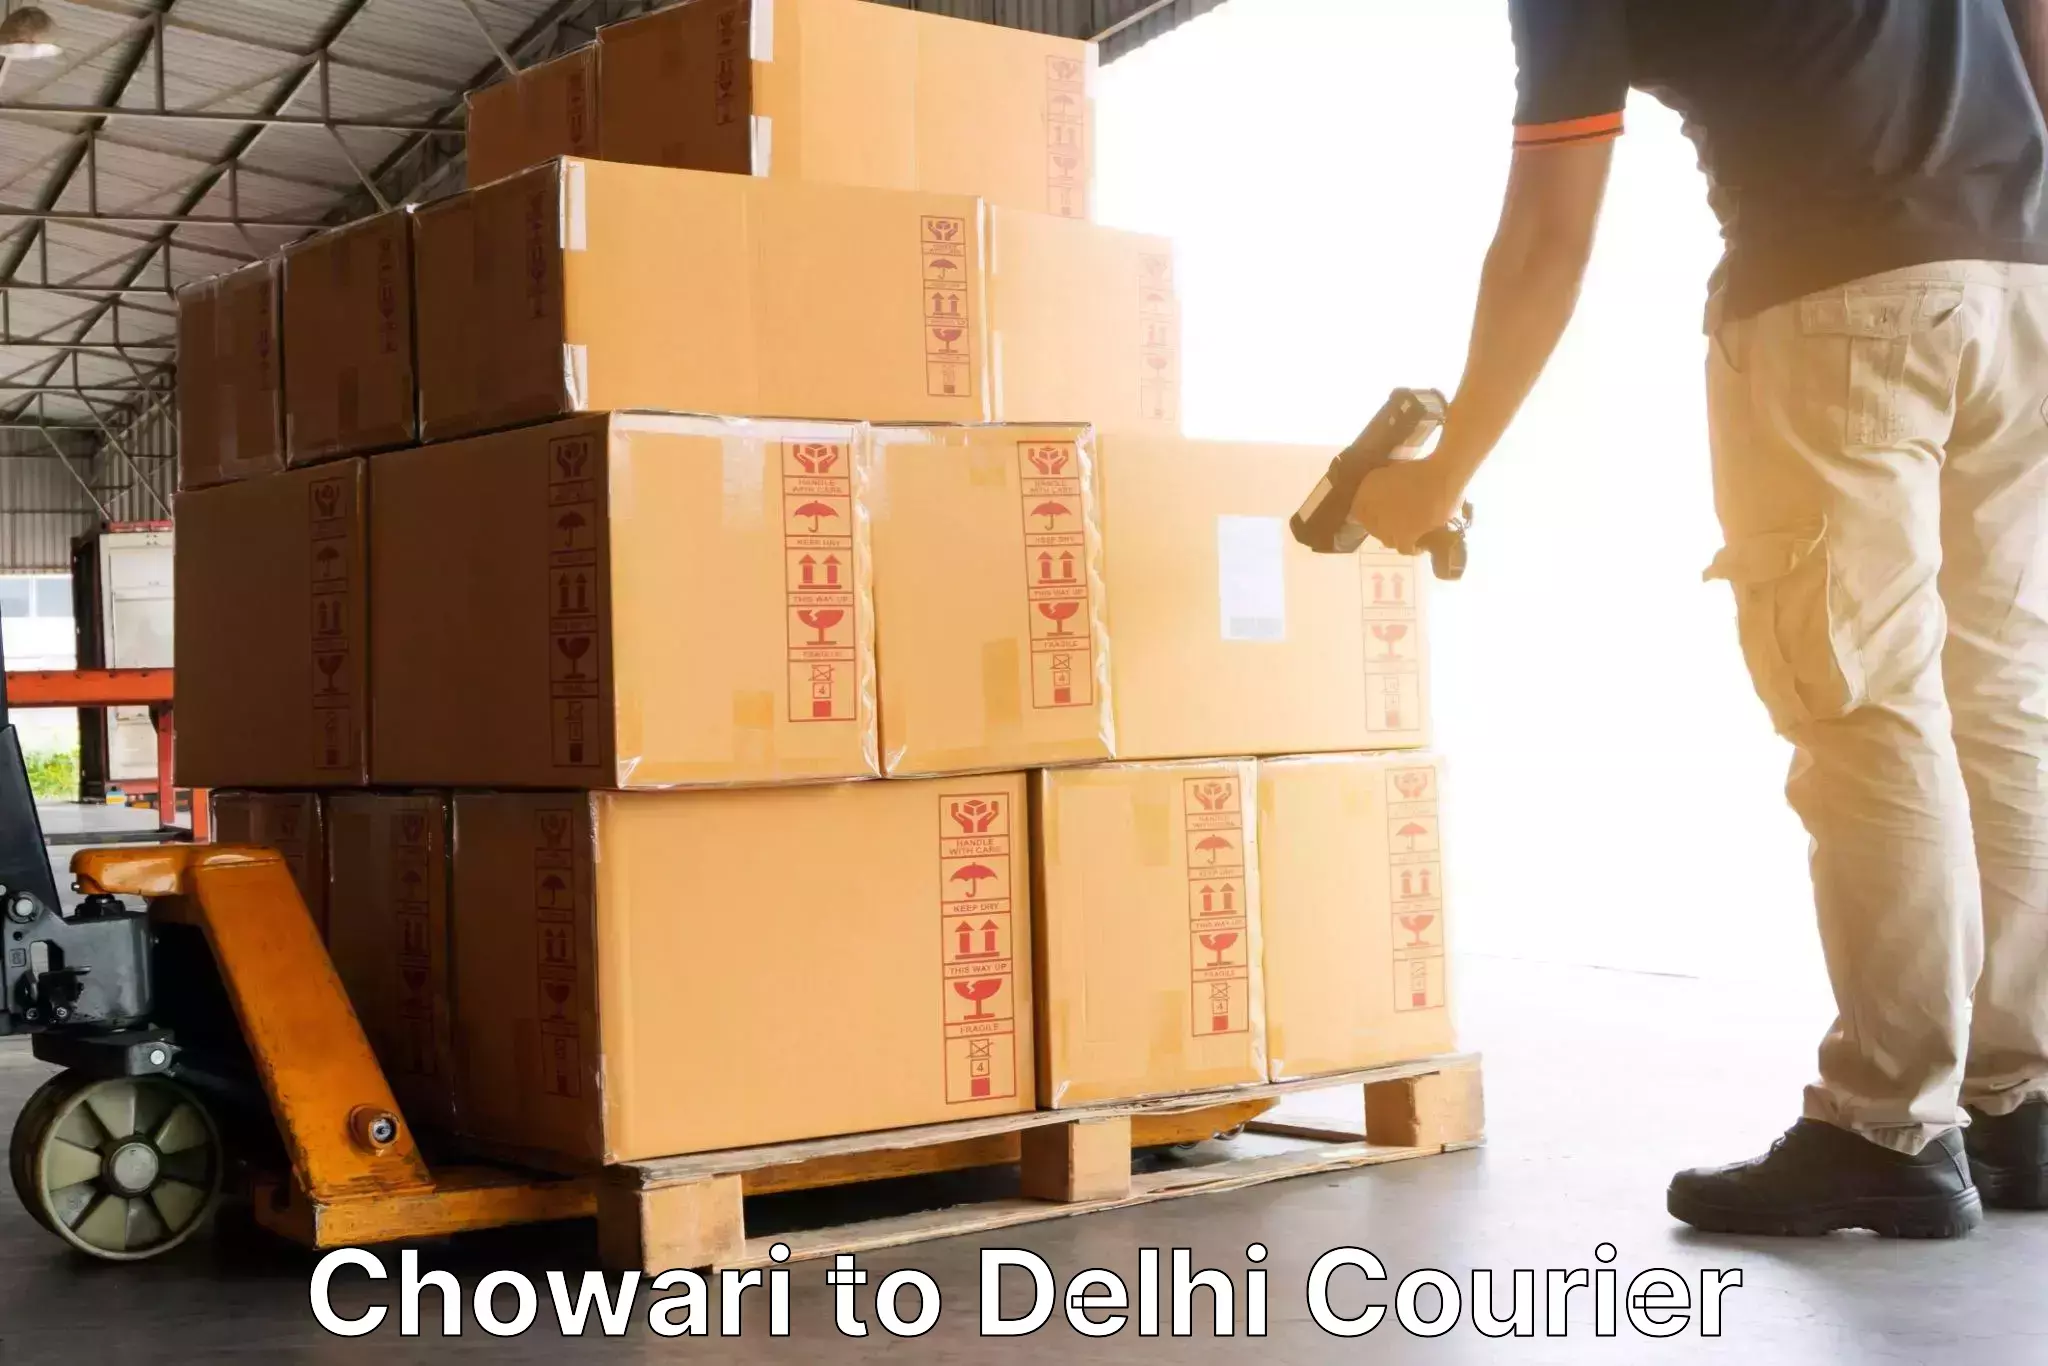 User-friendly courier app Chowari to NCR